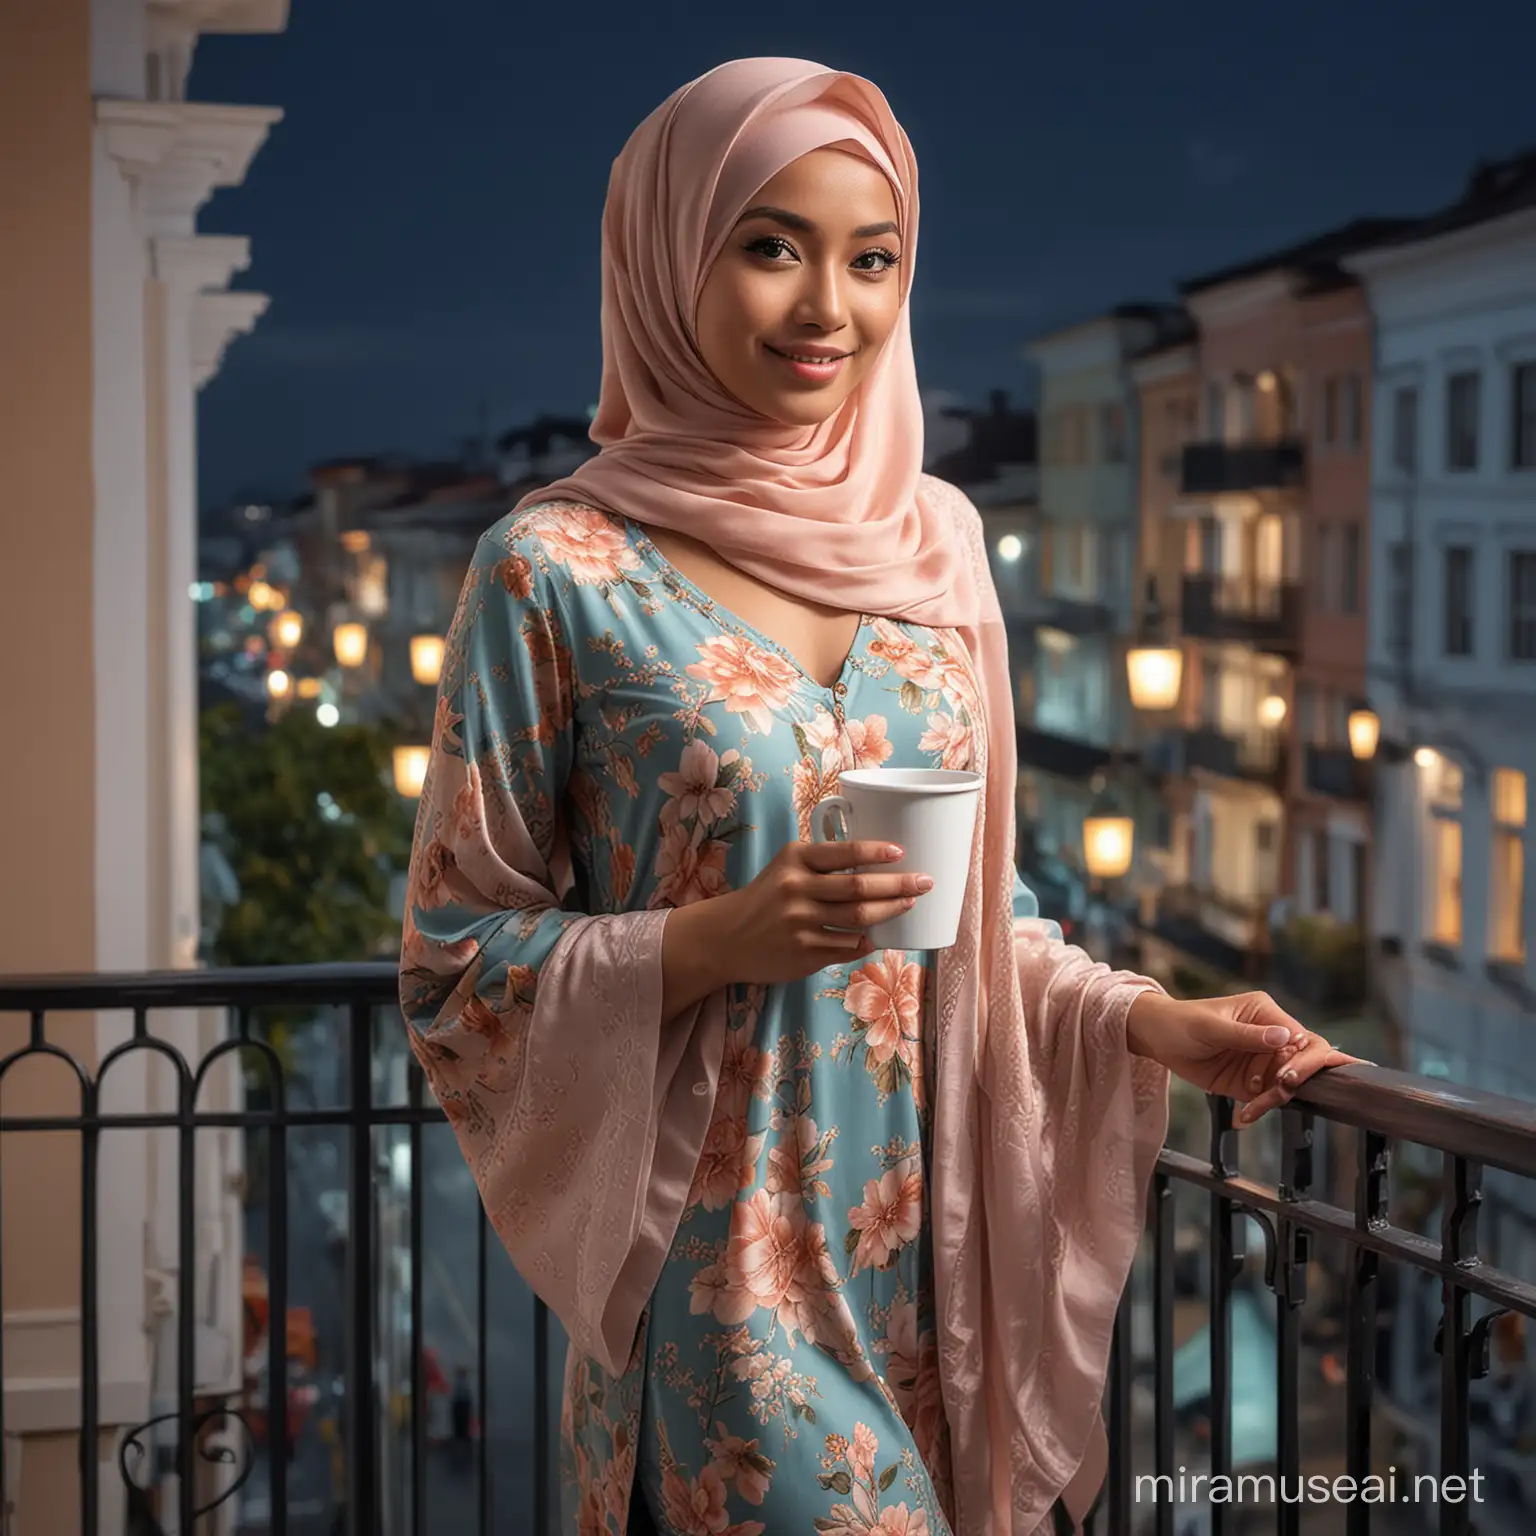 Stylish Malay Woman Admiring Evening Cityscape with Coffee